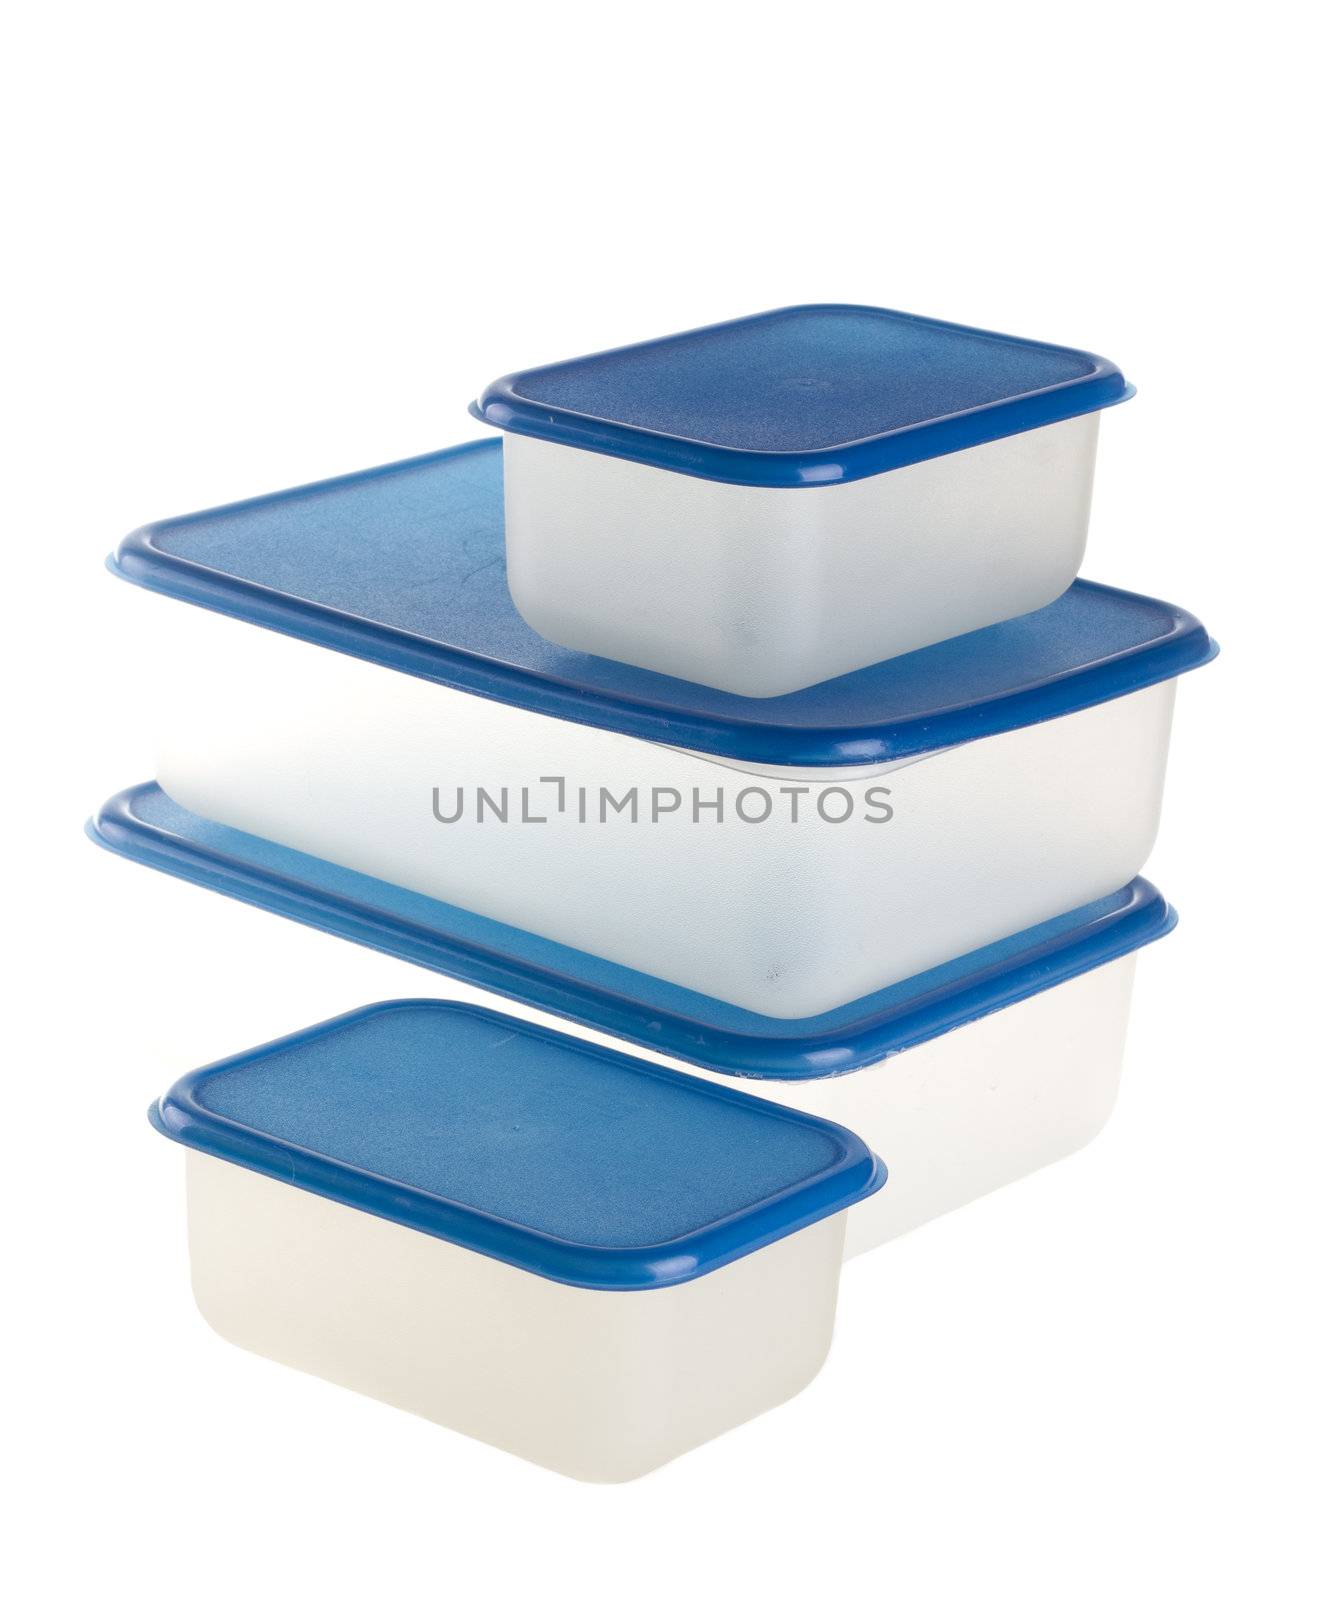 Plastic Containers on Isolated White Background